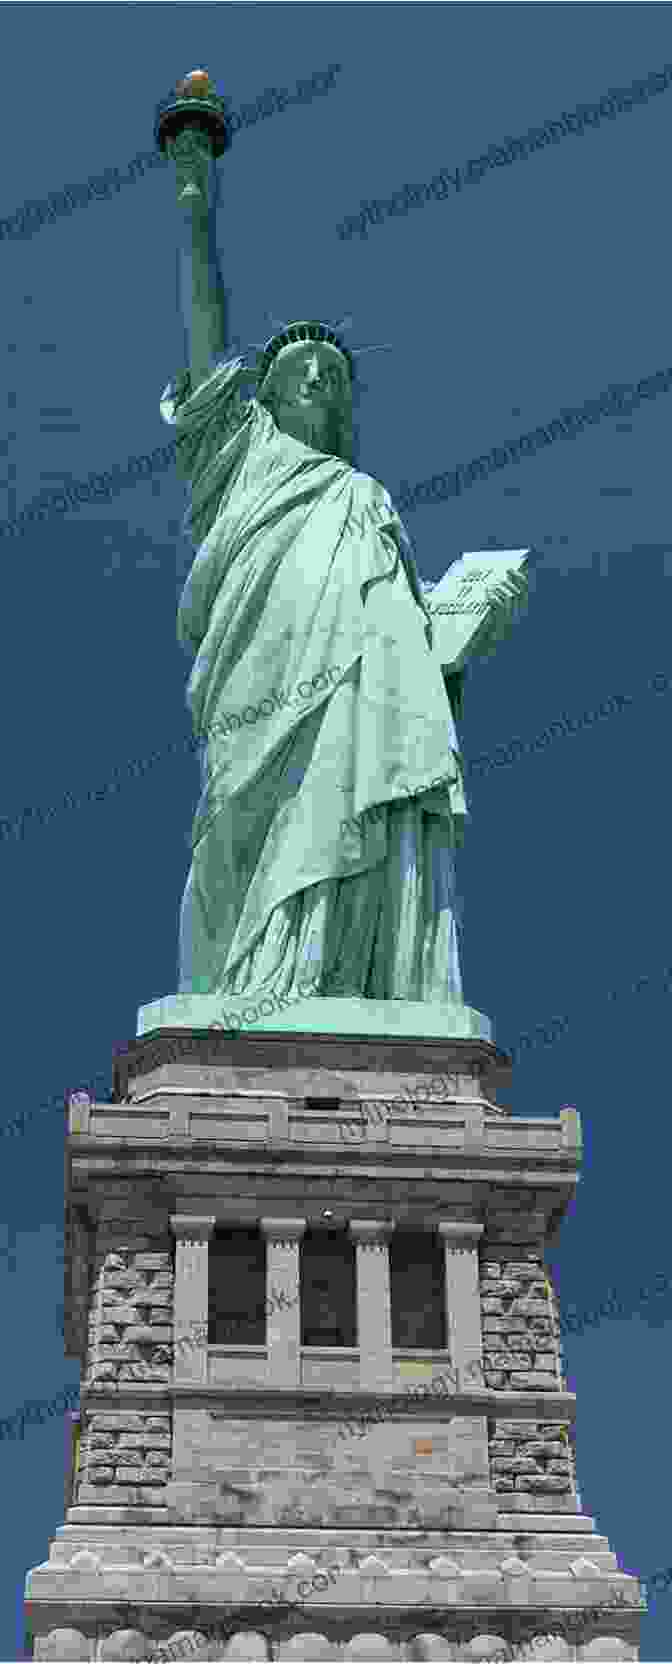 Amina Standing In Front Of The Statue Of Liberty Chasing Wind: From Africa To America In Search Of A Dream